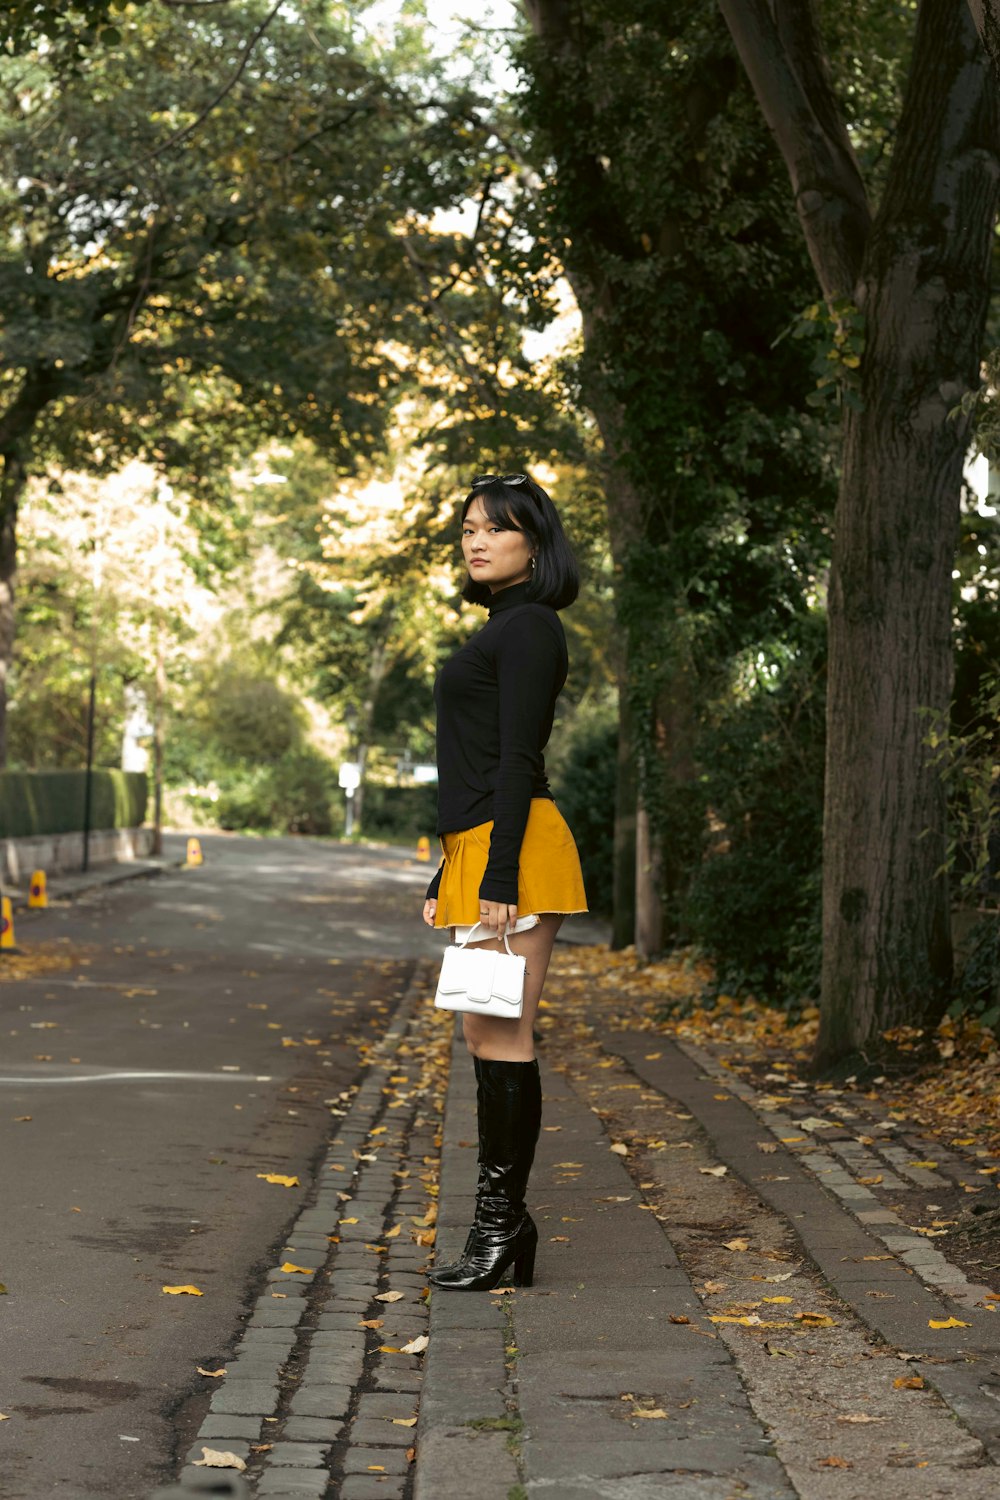 a woman in a black top and yellow skirt